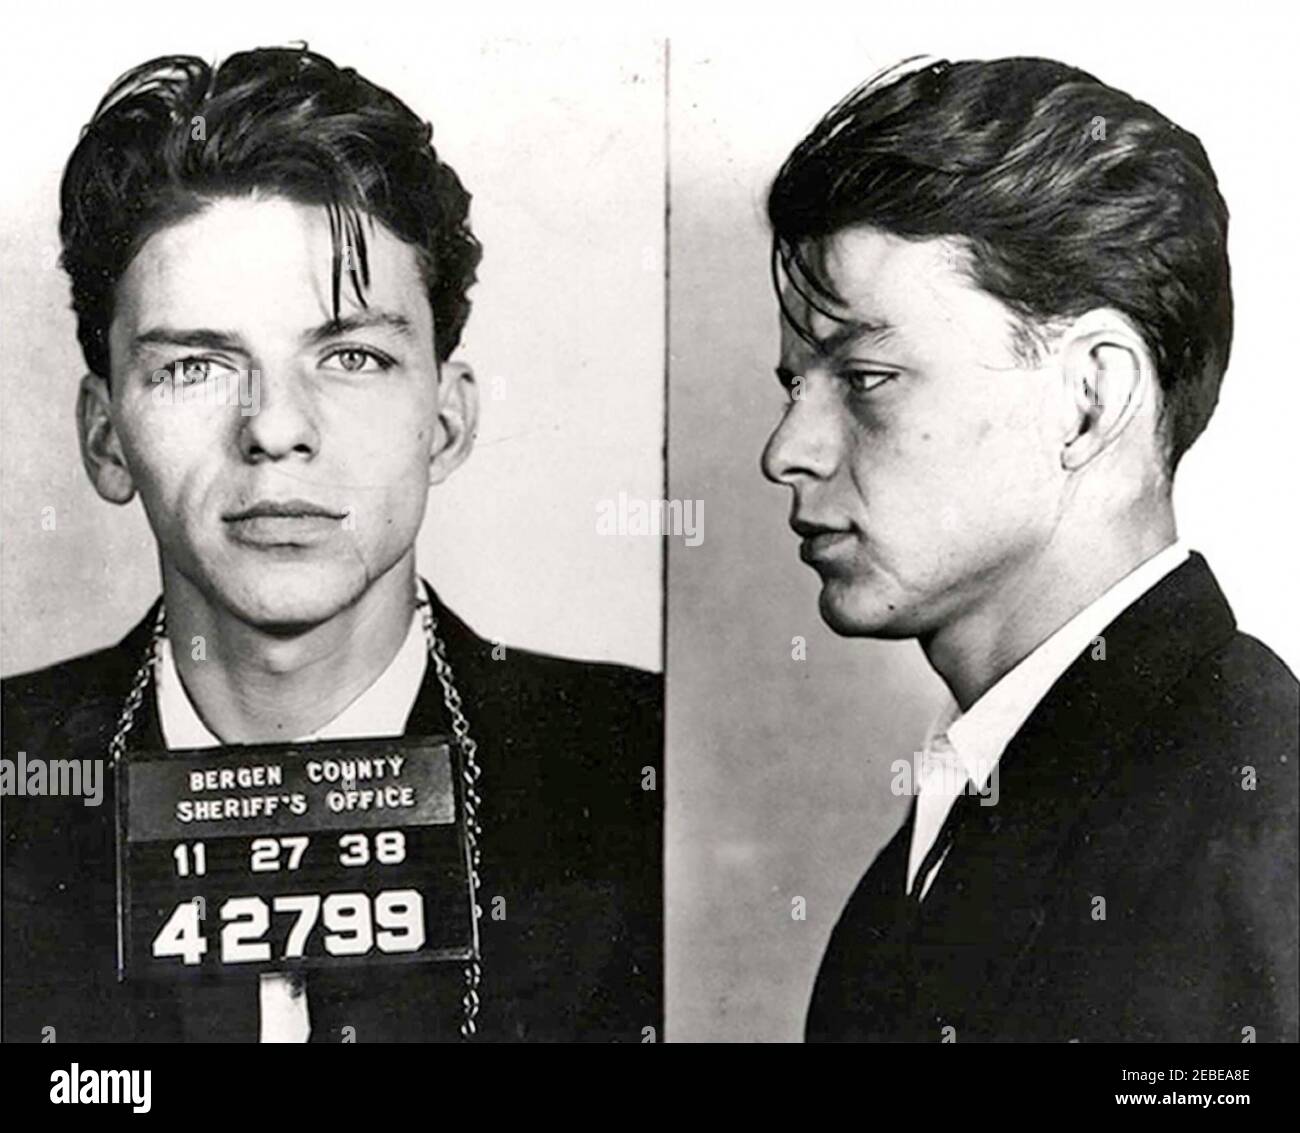 FRANK SINATRA  (1915-1998)  Police mugshot following his arrest in Hackensack, Bergen County, New Jersey  on 26 November 1938 on charges of seduction and adultery. The case was dismissed in court in January 1939. Stock Photo